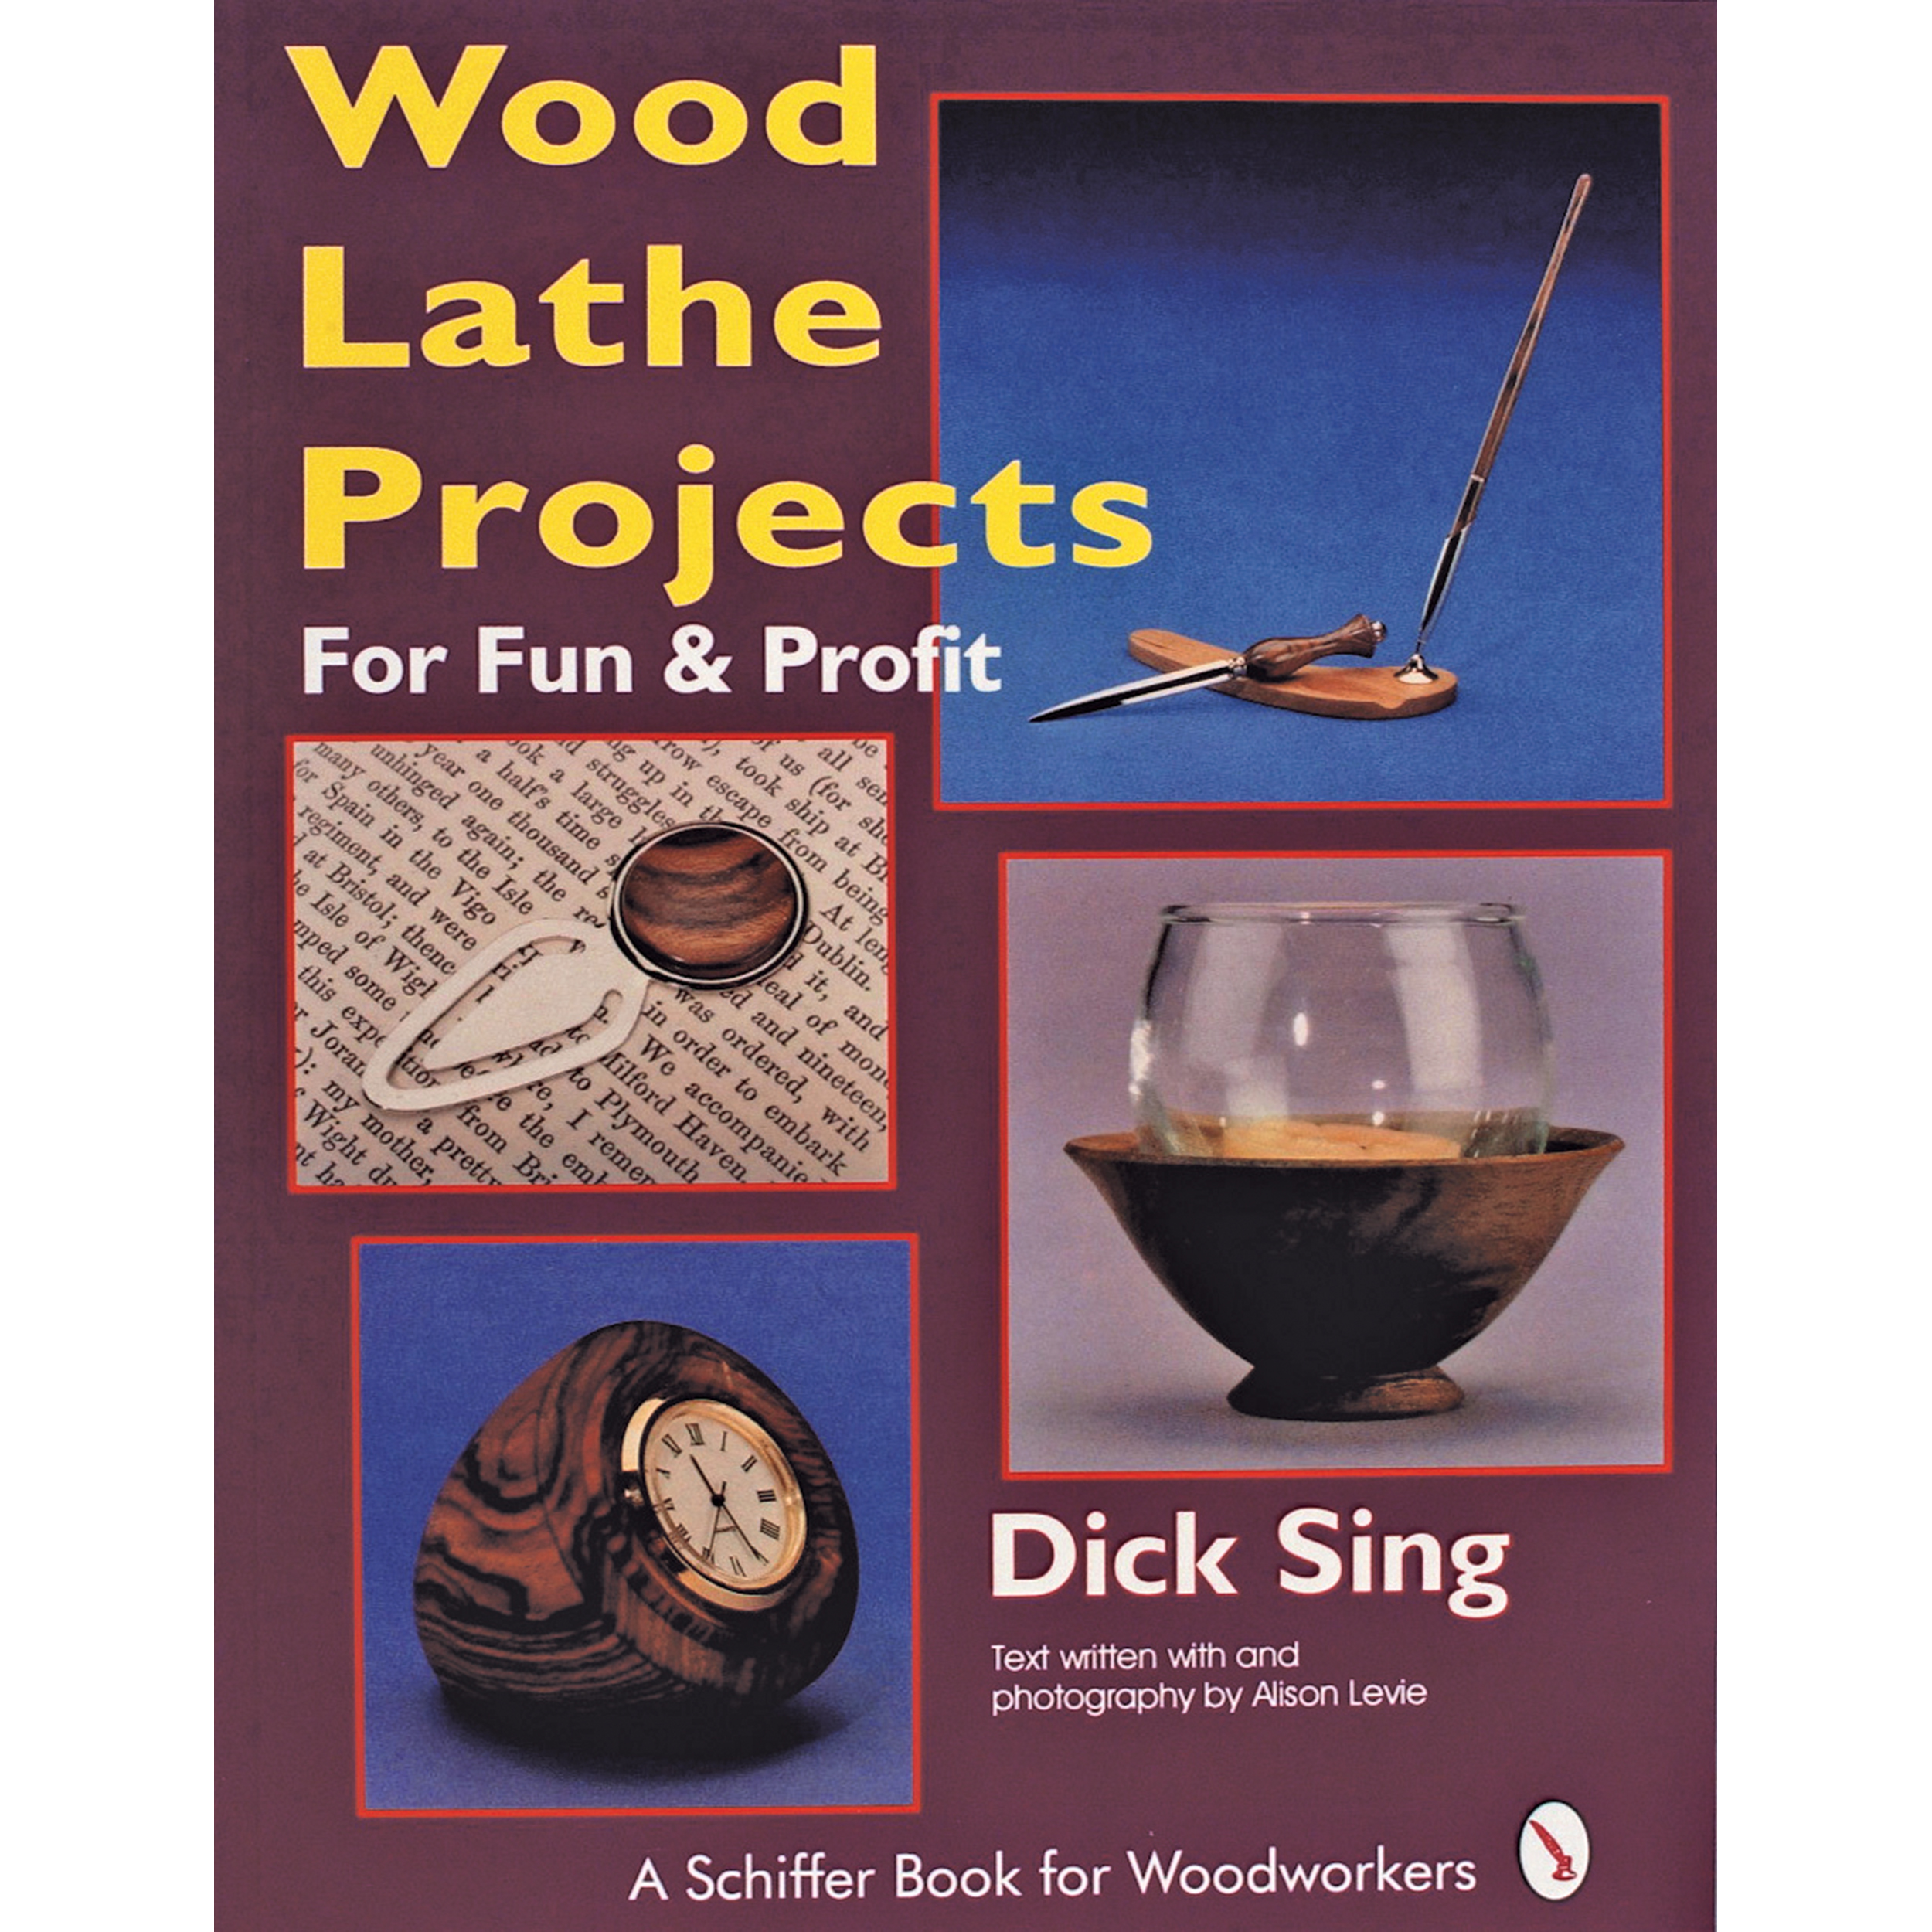 Wood Lathe Projects For Fun & Profit